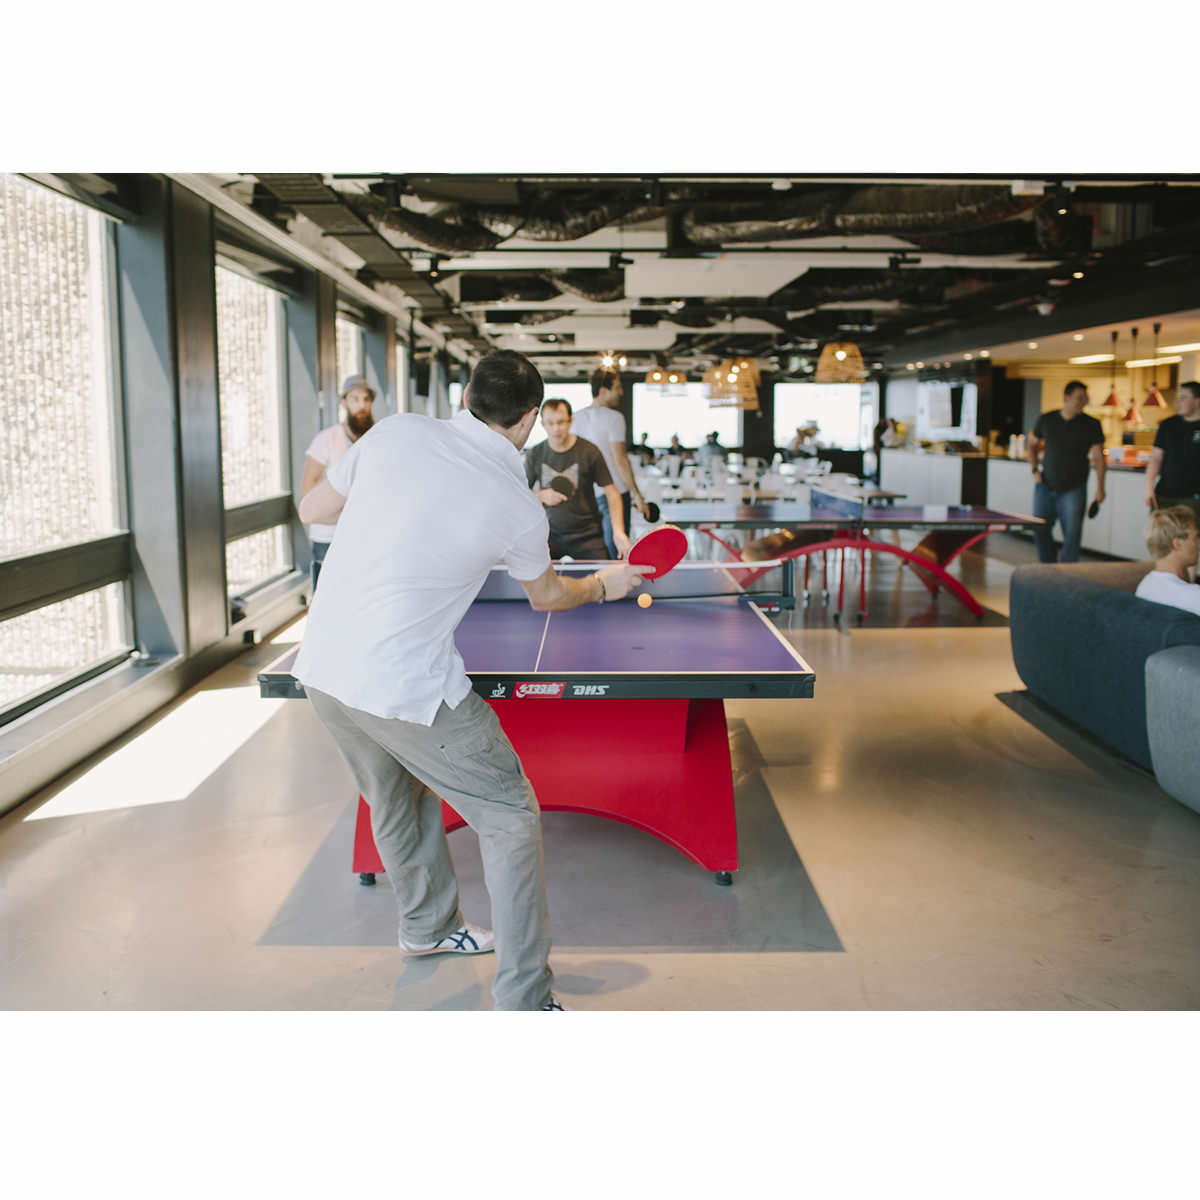 Annual Report - Giving Back - Ping Pong